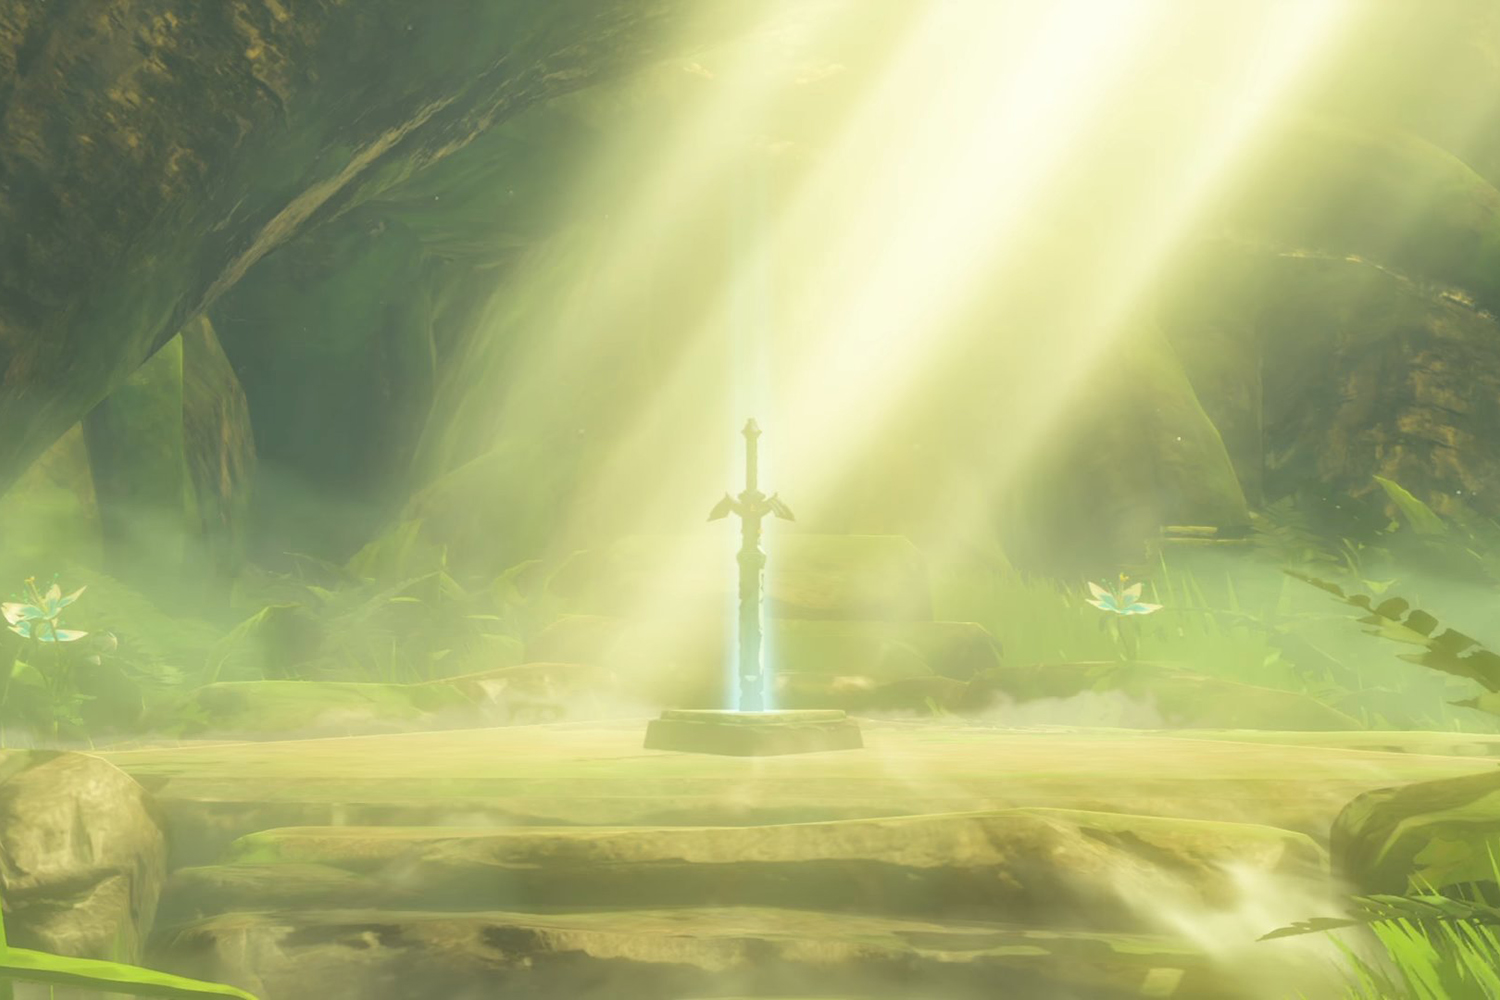 Amazing The Legend Of Zelda: Breath Of The Wild Pictures & Backgrounds